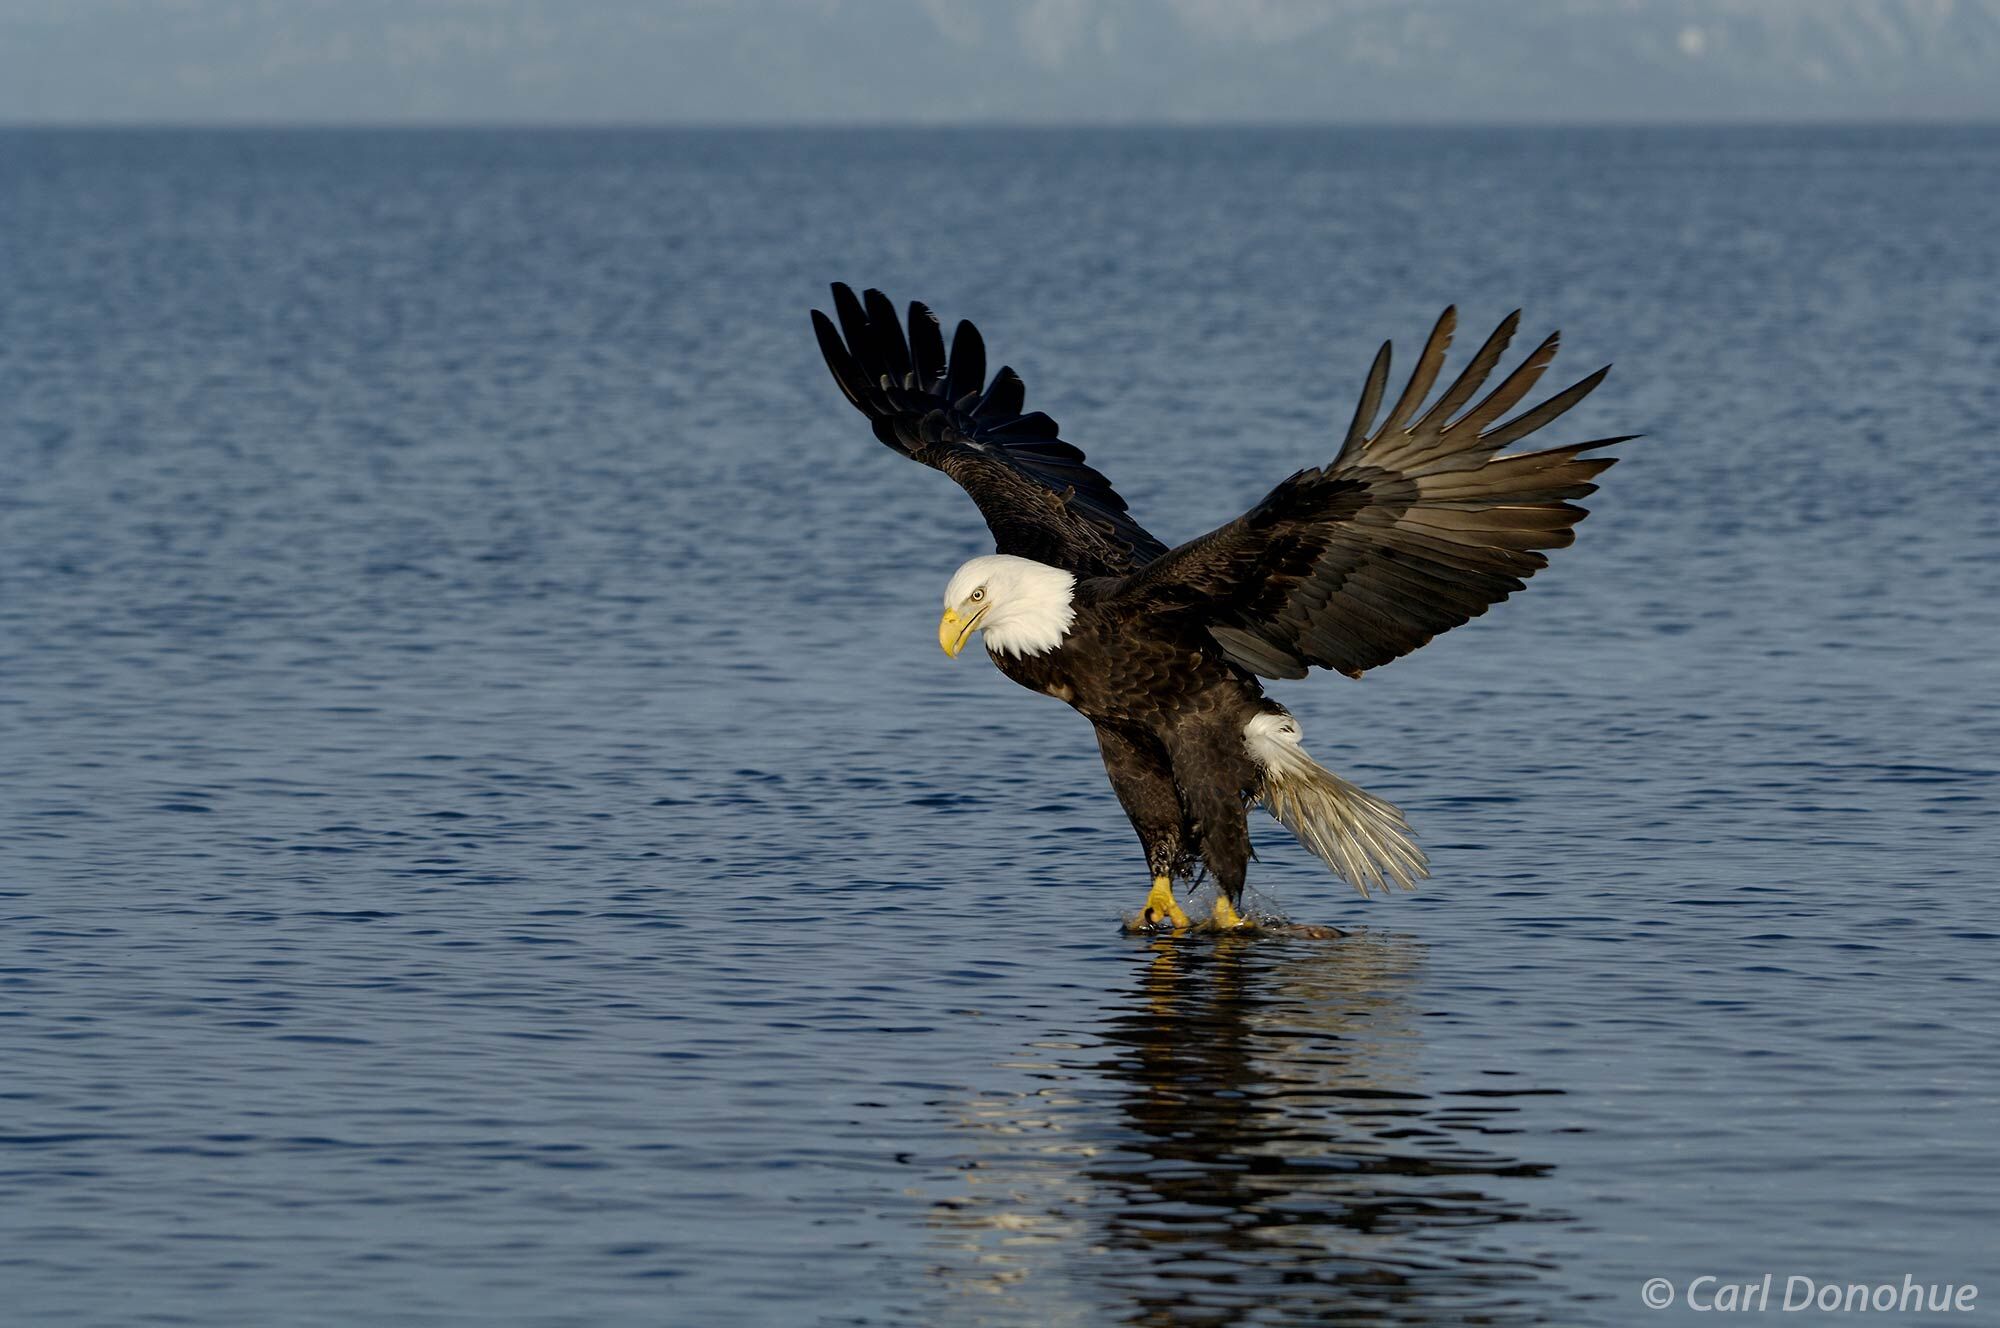 The bald eagle gracefully glides above Kachemak Bay, its sharp talons extended as it goes in for the catch. Bald eagle fishing...